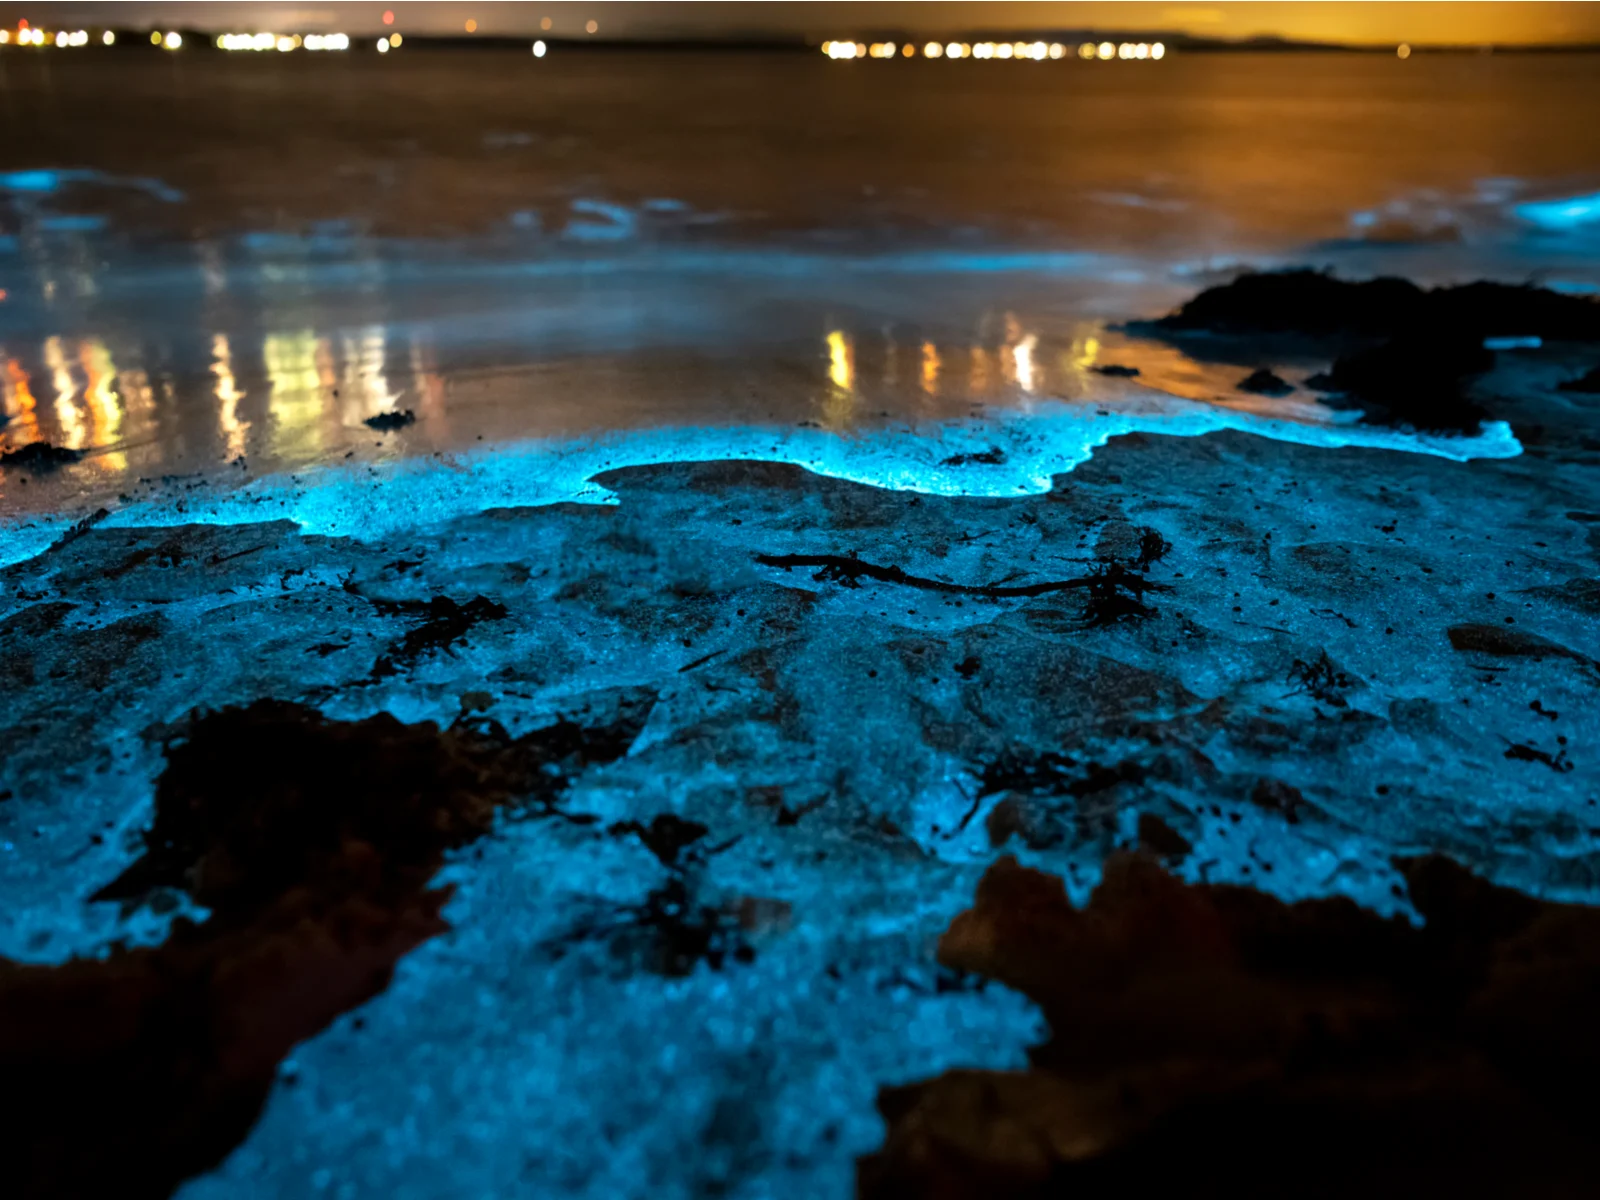 The mesmerizing Puerto Mosquito Bioluminescent Bay or Mosquito Bio Bay at night, where waves glow because of bioluminescent plankton specie, is one of the best places to visit in Puerto Rico